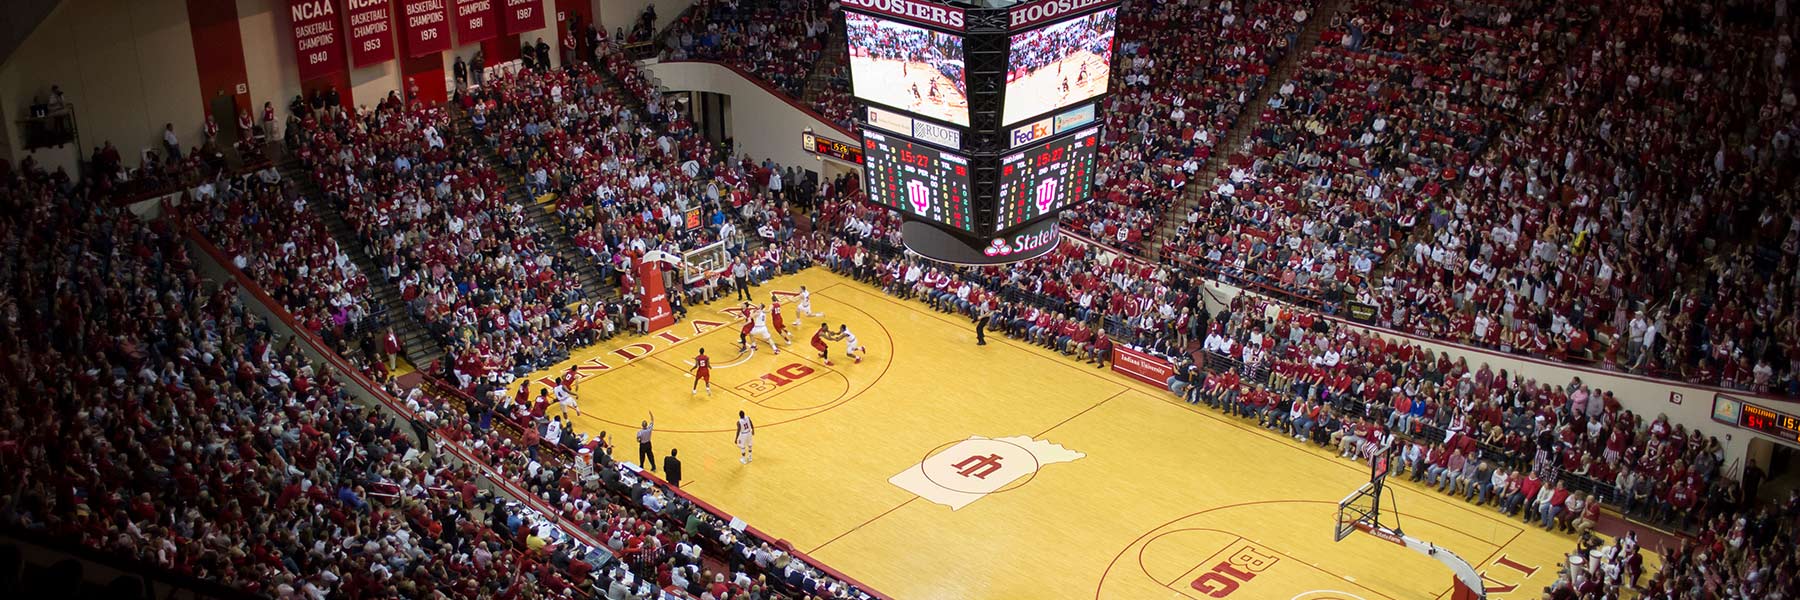 Stands filled with people wearing red and white at a basketball game.